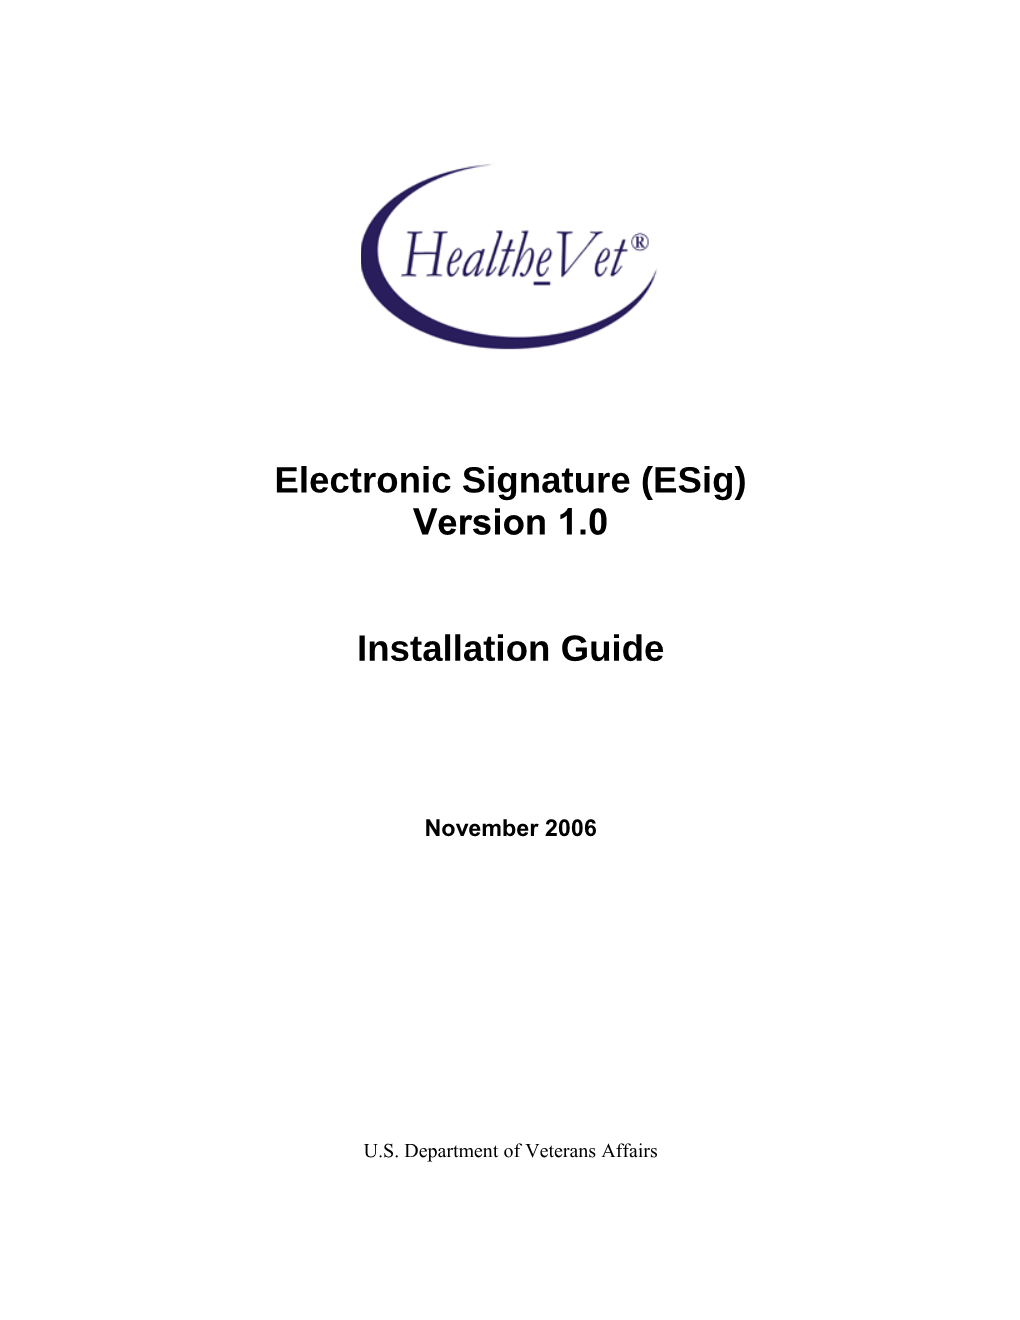 Electronic Signature 1.0 Installation Guide